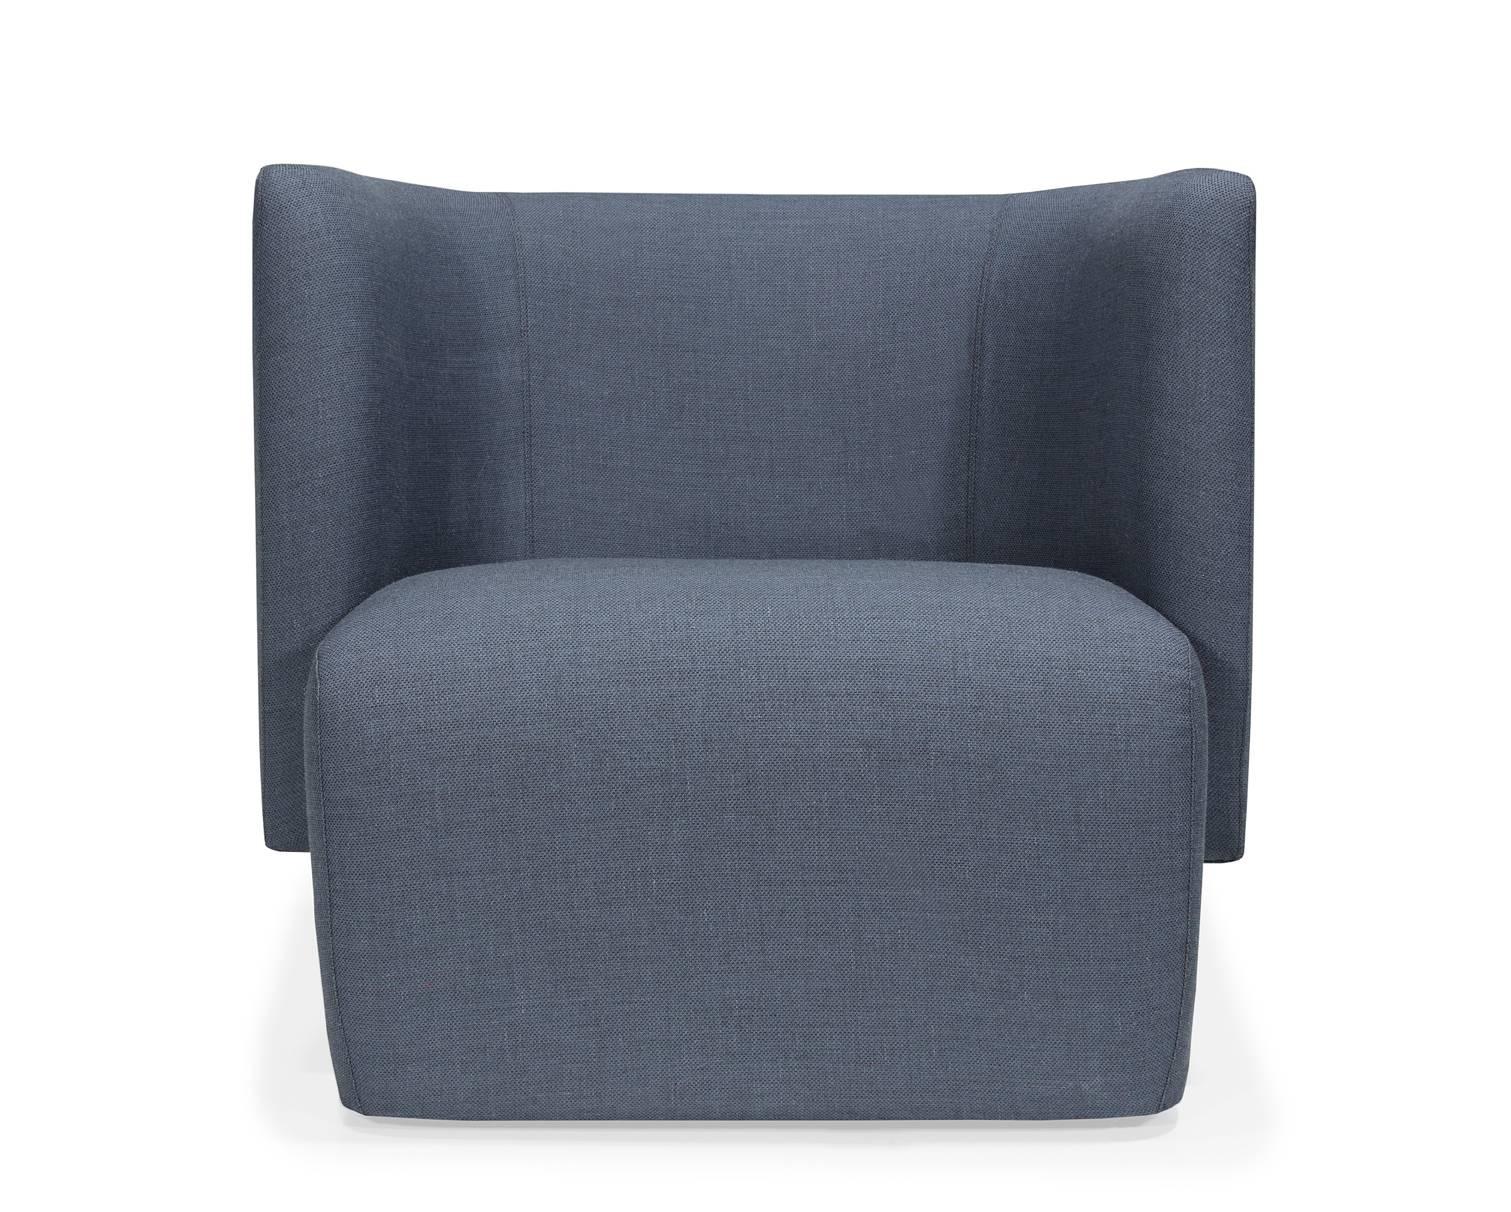 Pair of European Modern Fabric Armchairs for Modular Configurations For Sale 2